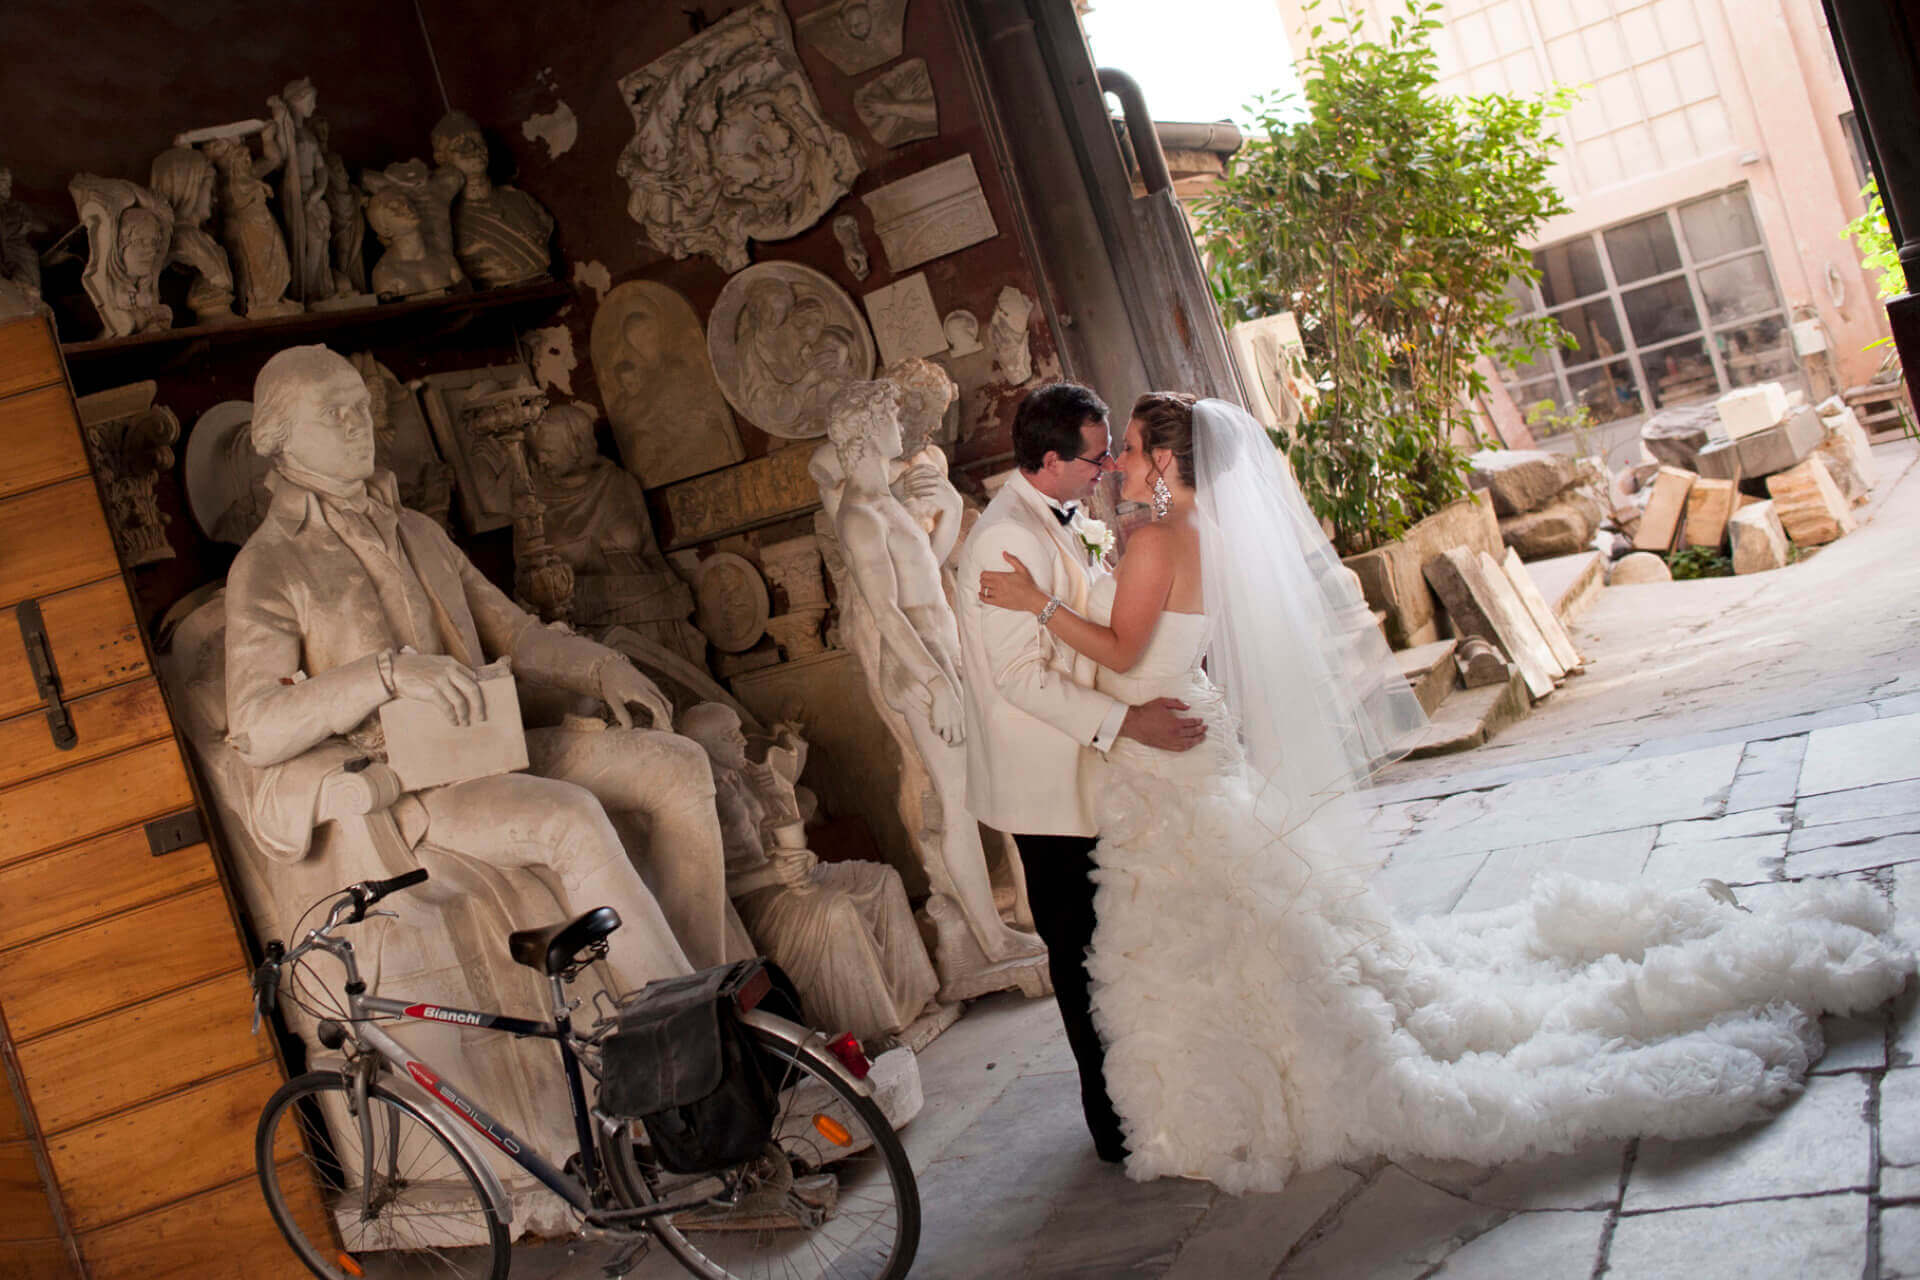 Getting Married in Italy: 5 Things You Need to Know